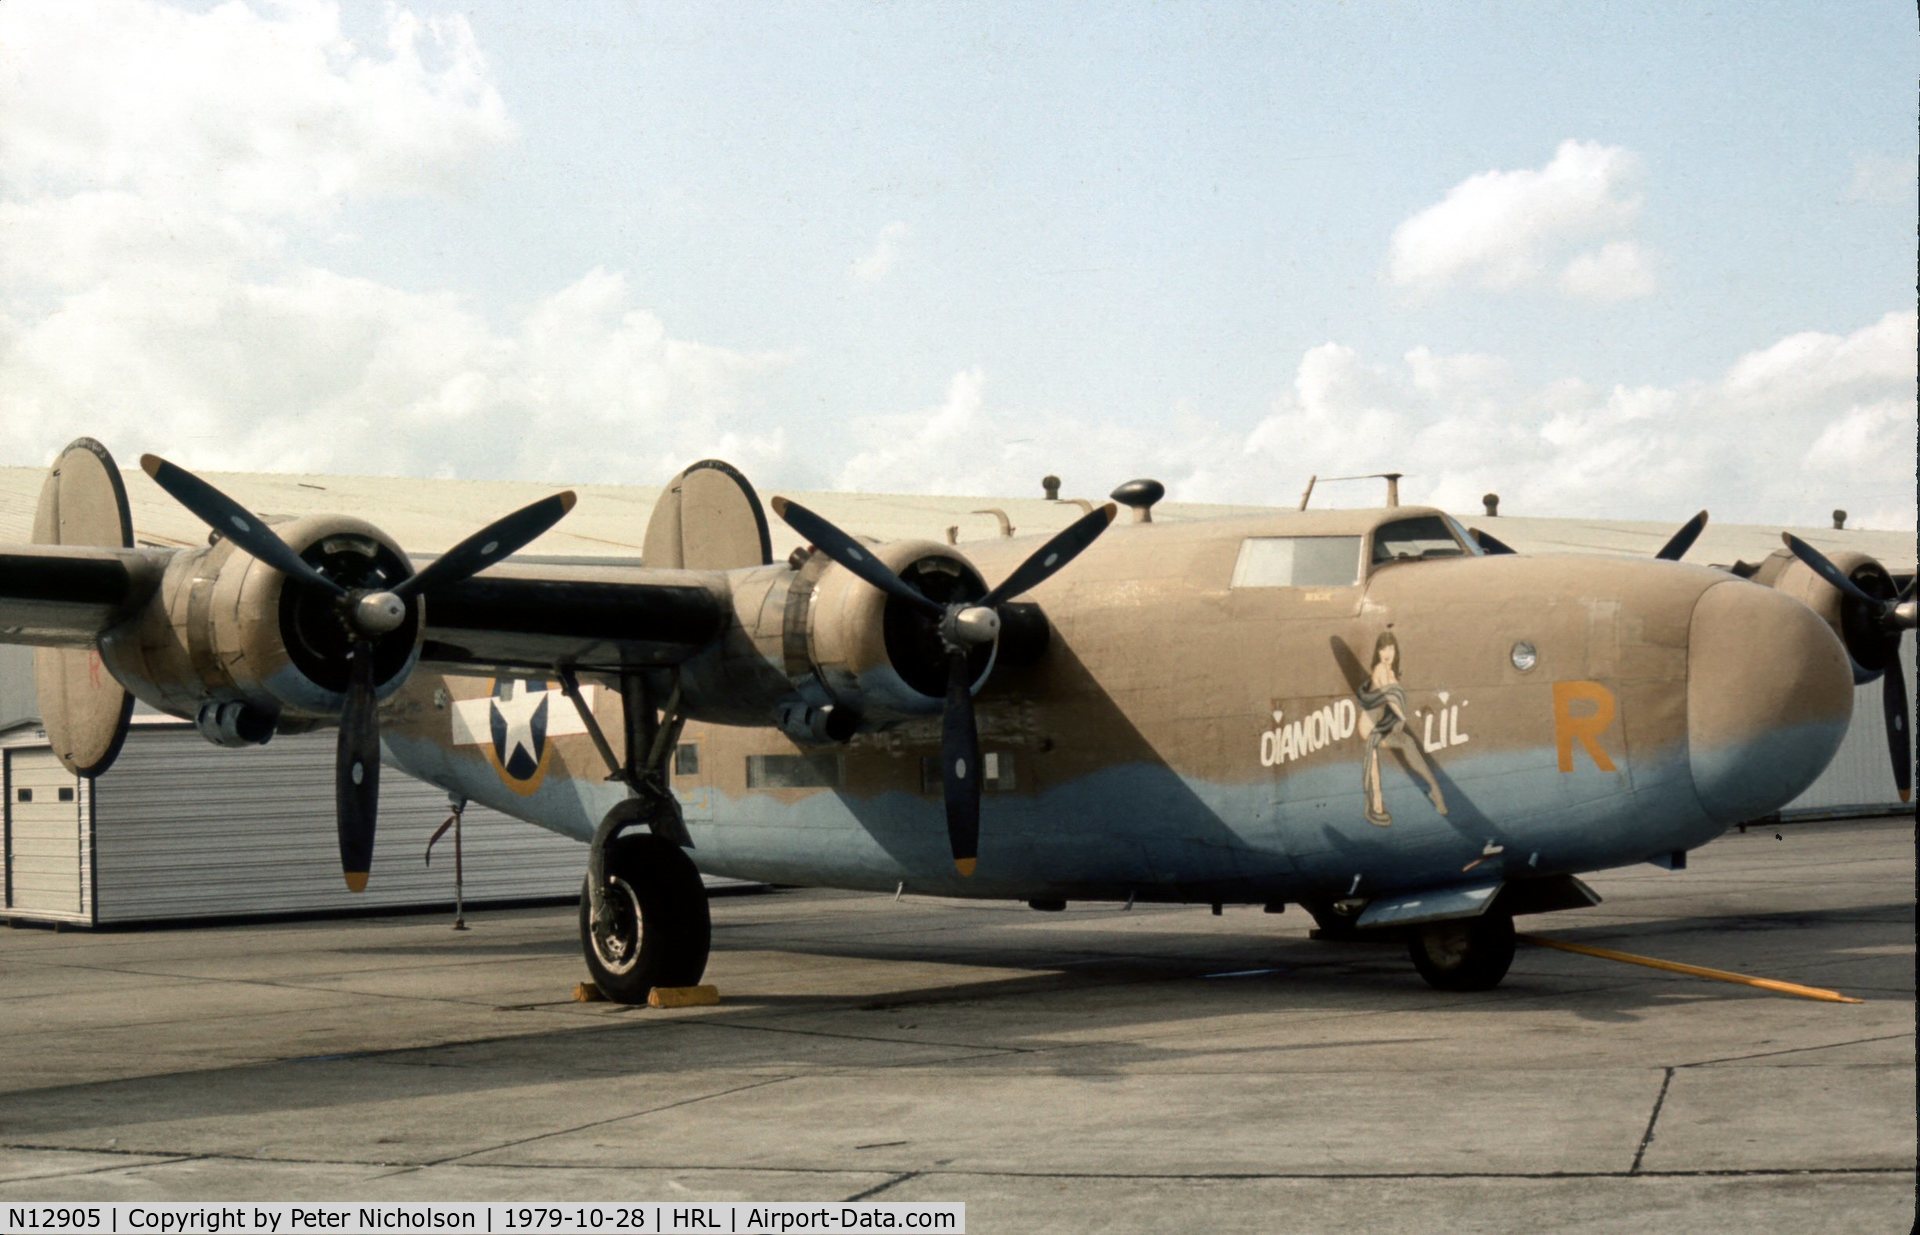 N12905, 1940 Consolidated Vultee RLB30 (B-24) C/N 18, The Confederate Air Force's Diamond Lil was seen at their Harlingen base in October 1979.